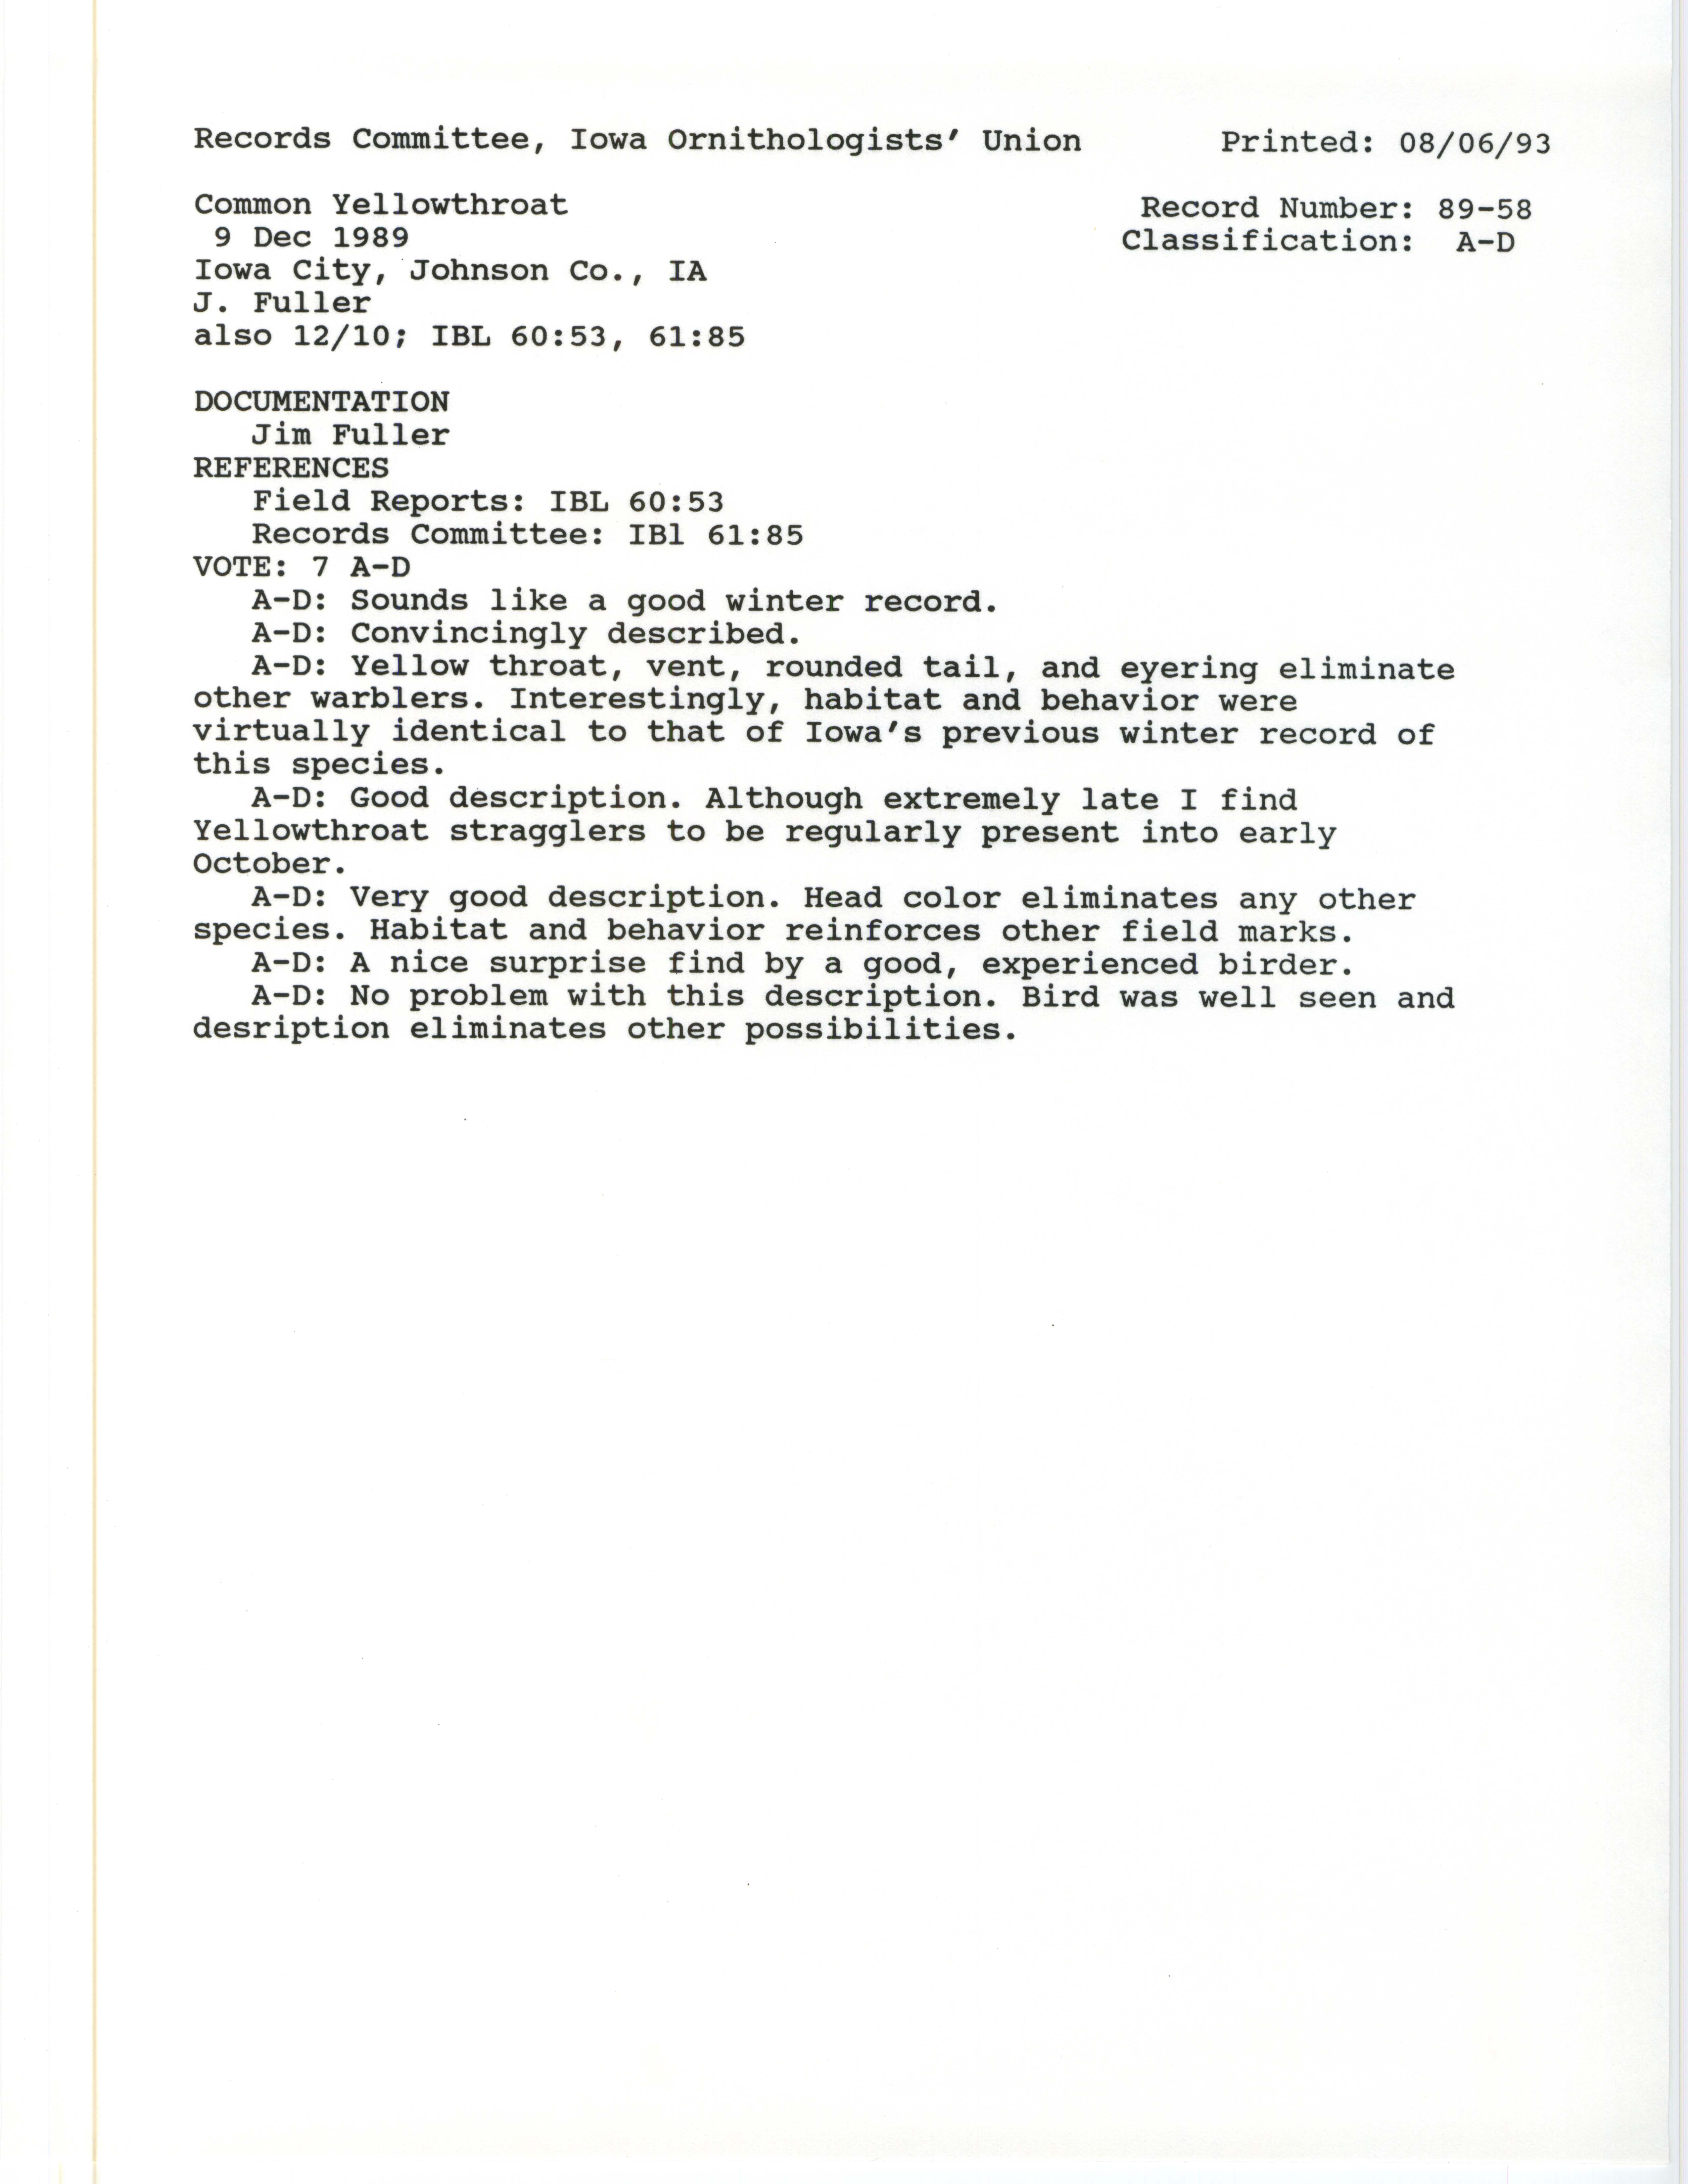 Records Committee review for rare bird sighting for Common Yellowthroat at Iowa City, 1989